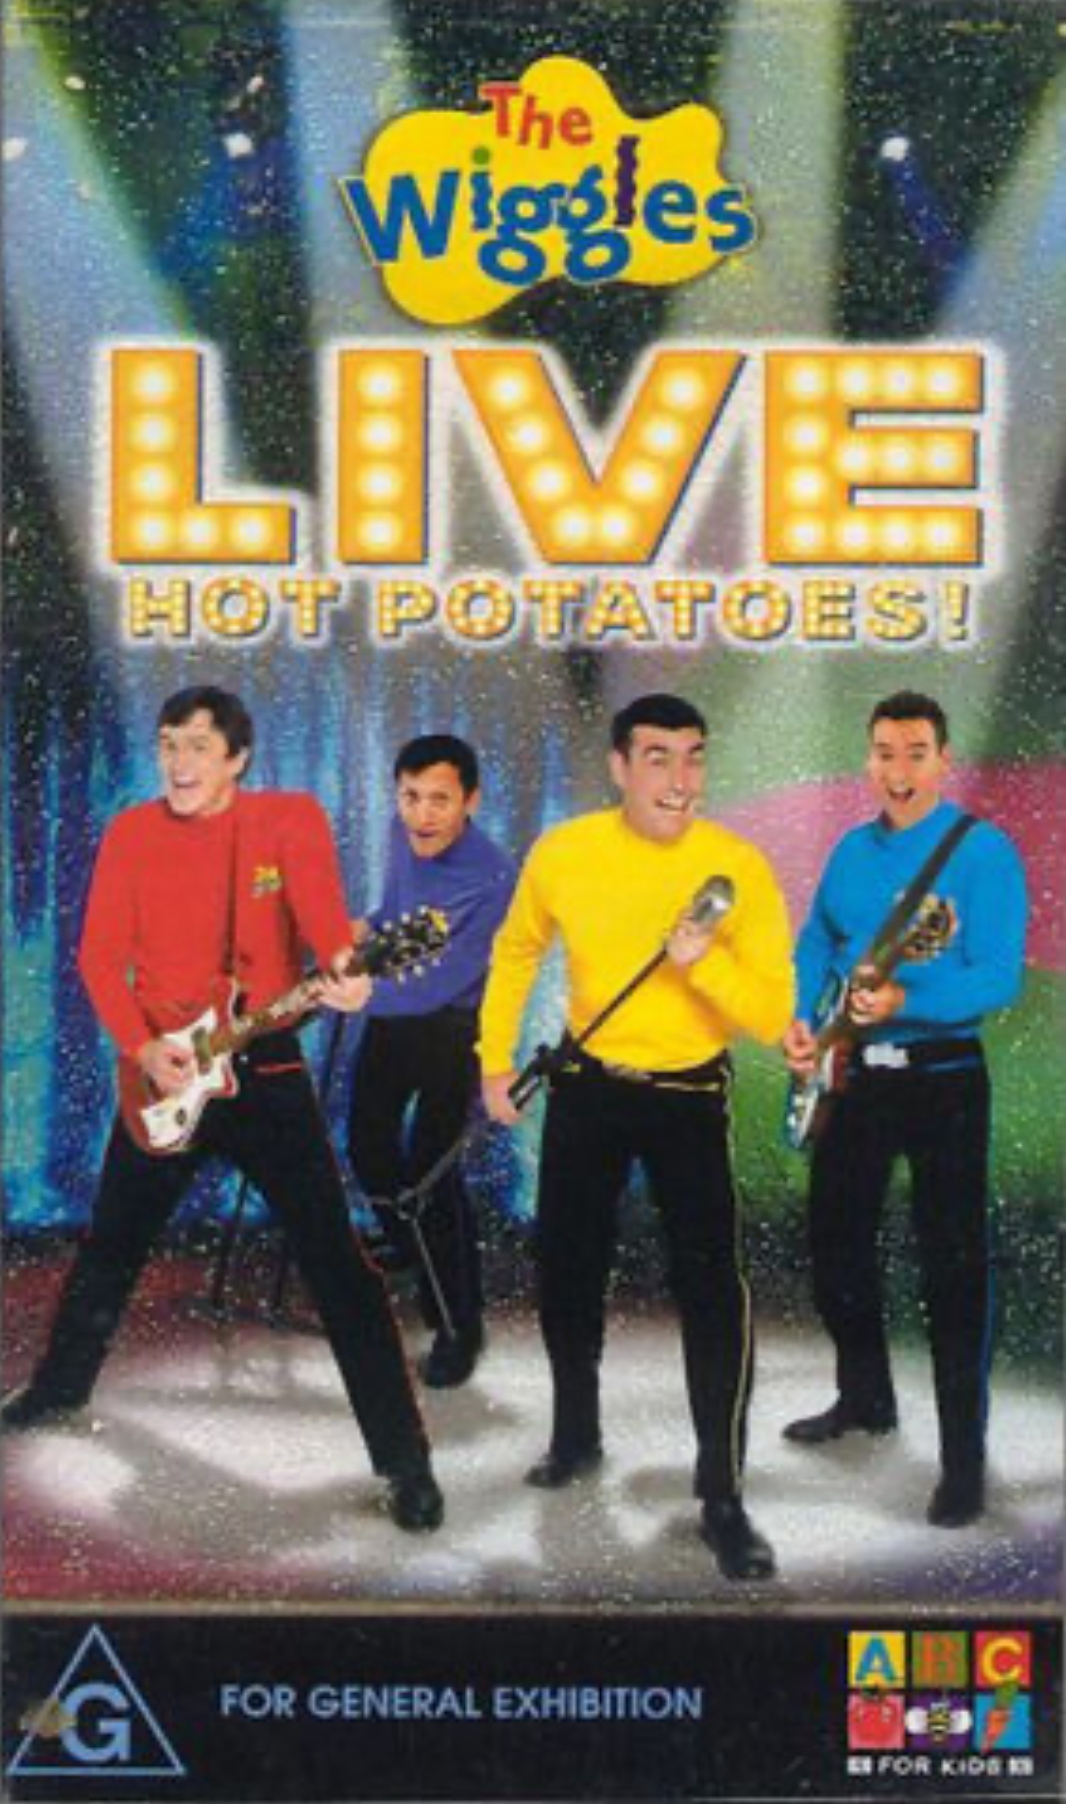 live-hot-potatoes-found-uncut-version-of-wiggles-video-2005-the-lost-media-wiki